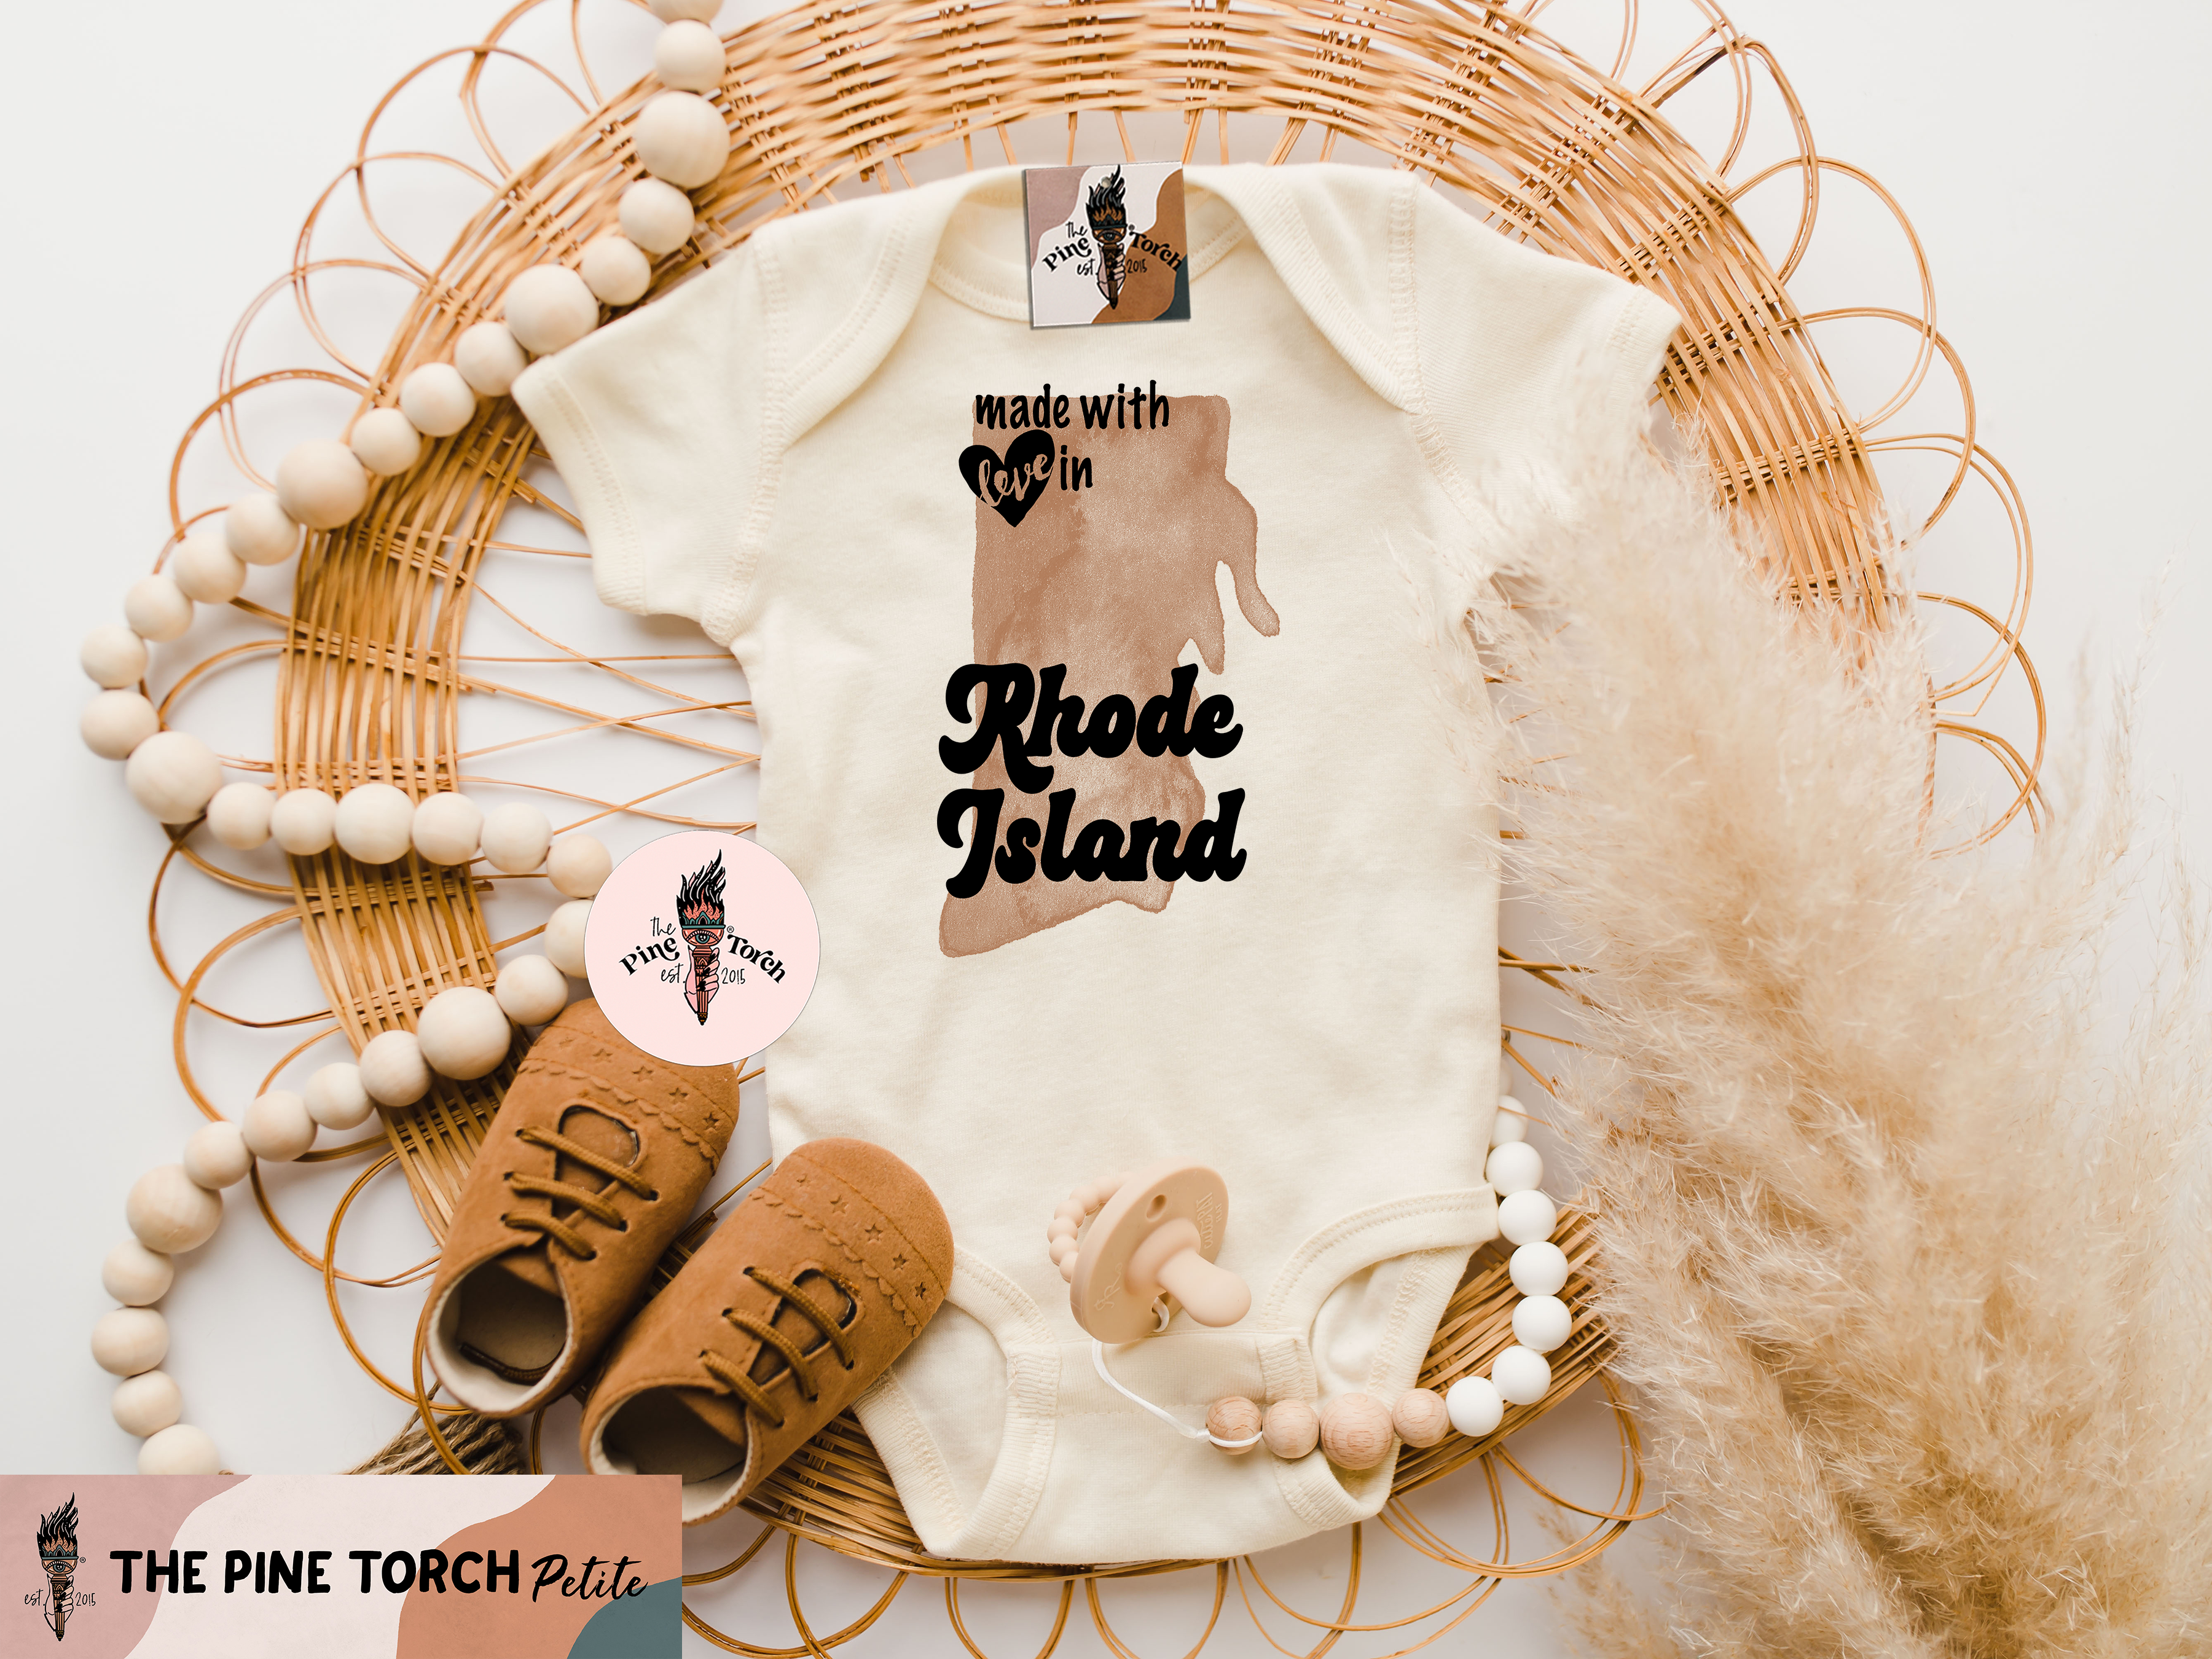 « MADE WITH LOVE IN RHODE ISLAND » BODYSUIT